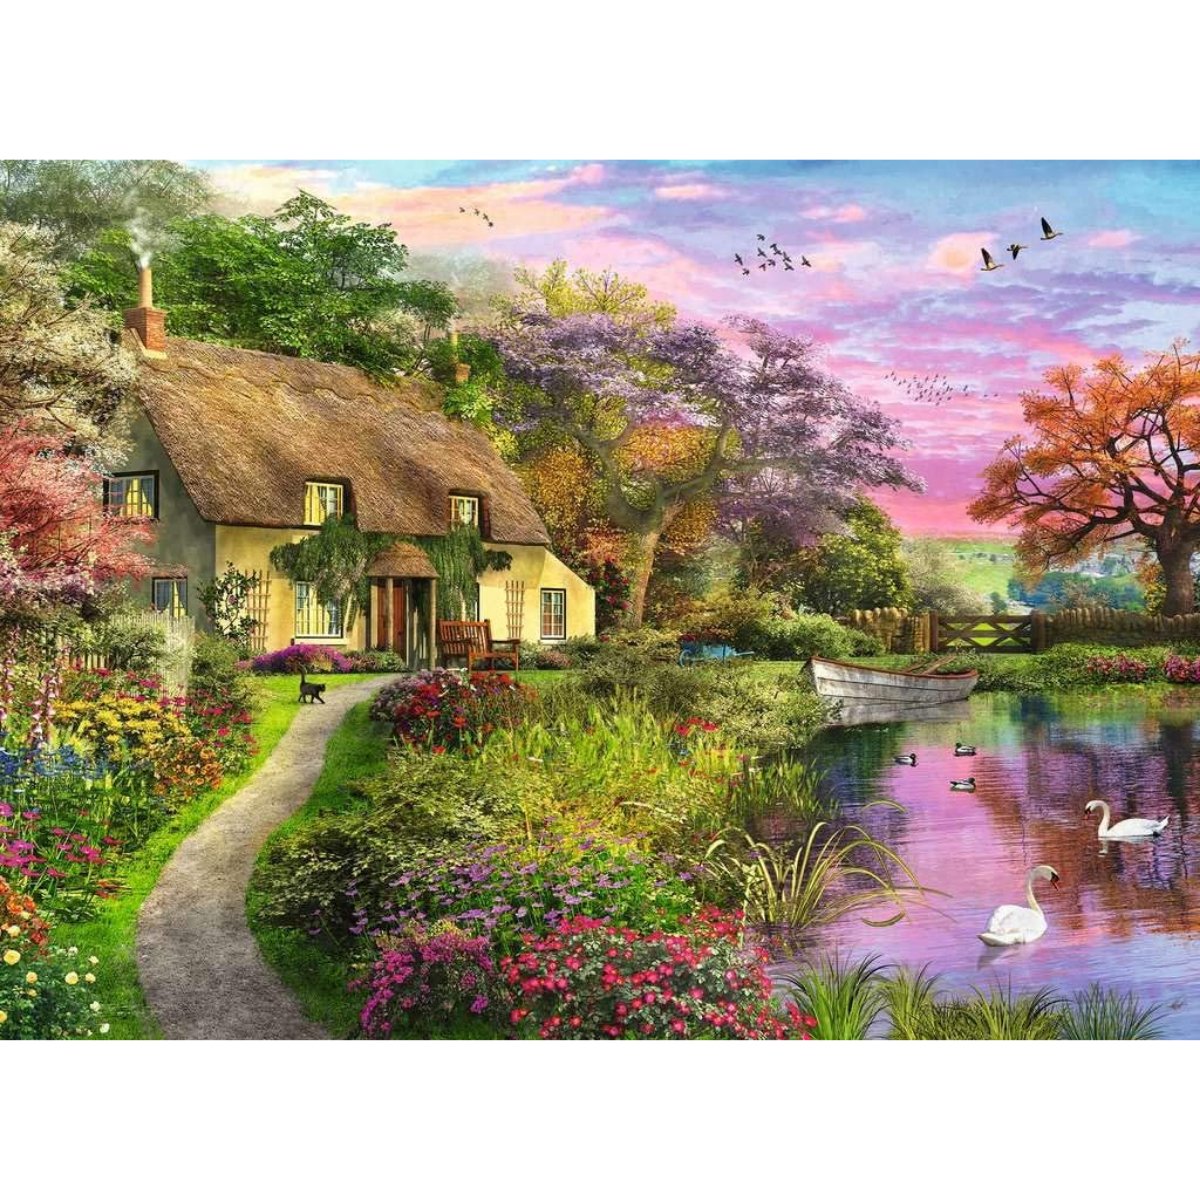 Ravensburger Country House 500 Piece Jigsaw Puzzle - Phillips Hobbies